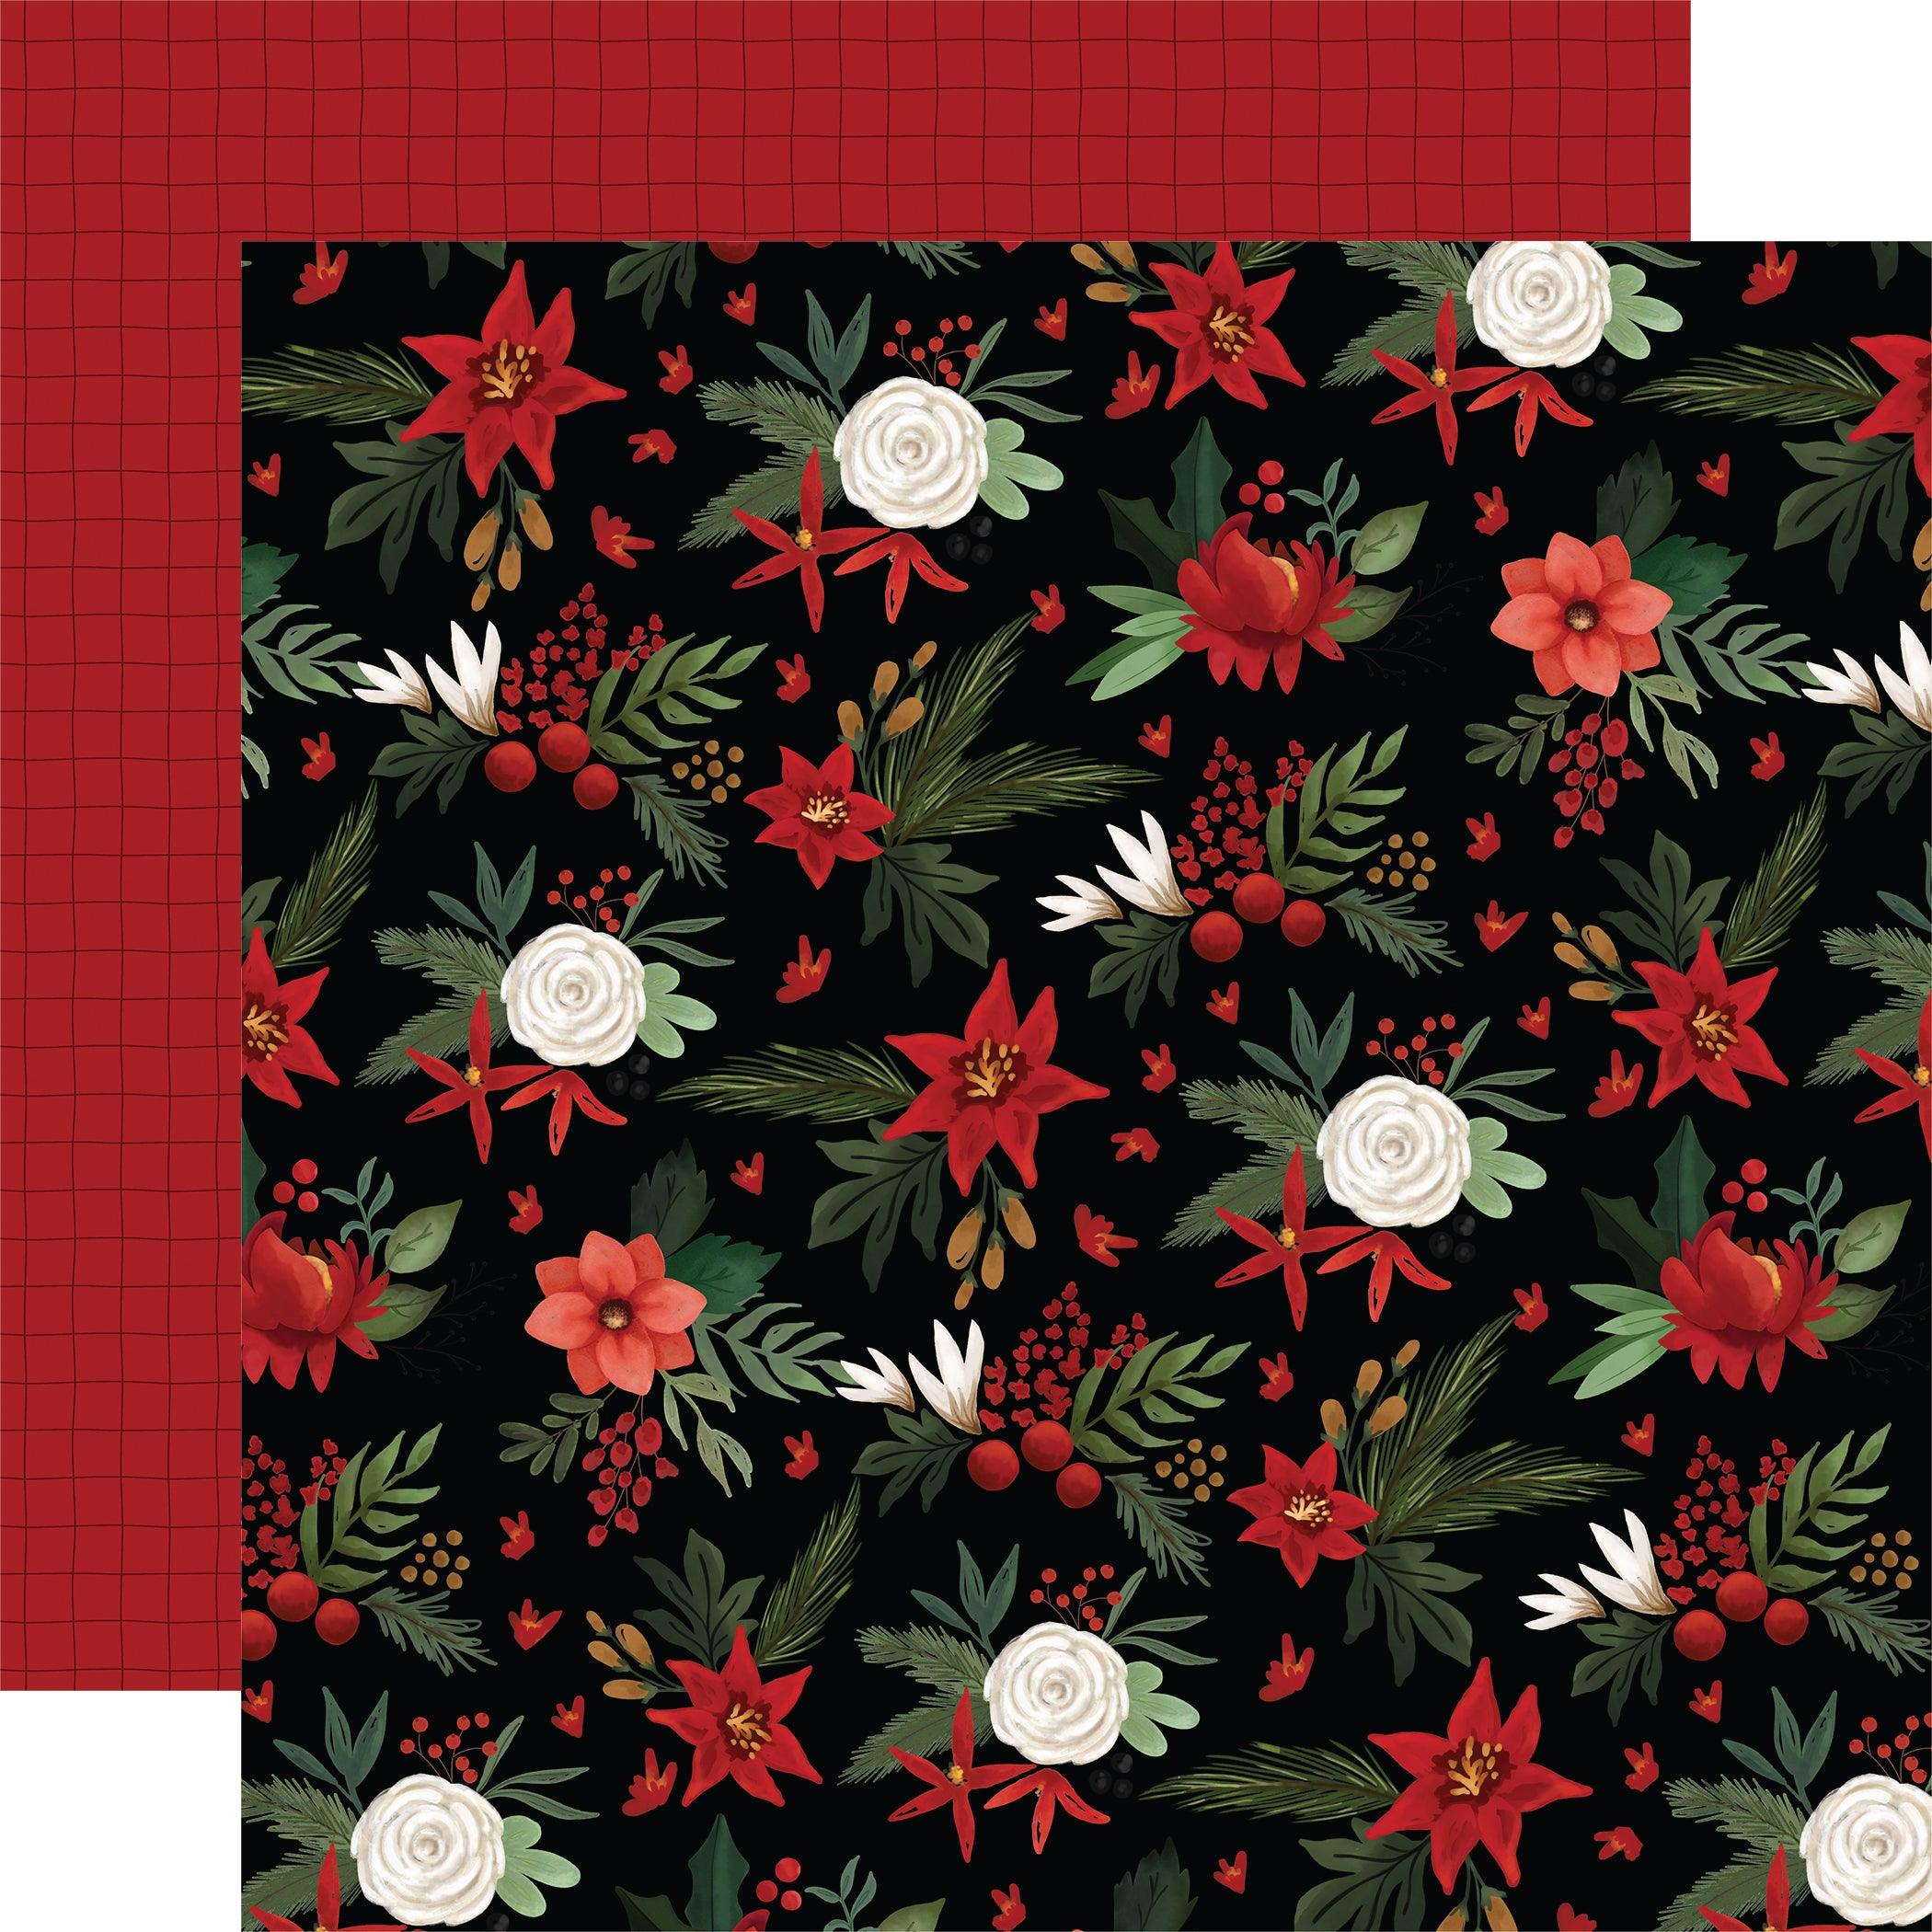 A Wonderful Christmas Collection Home Filled Floral 12 x 12 Double-Sided Scrapbook Paper by Carta Bella - Scrapbook Supply Companies